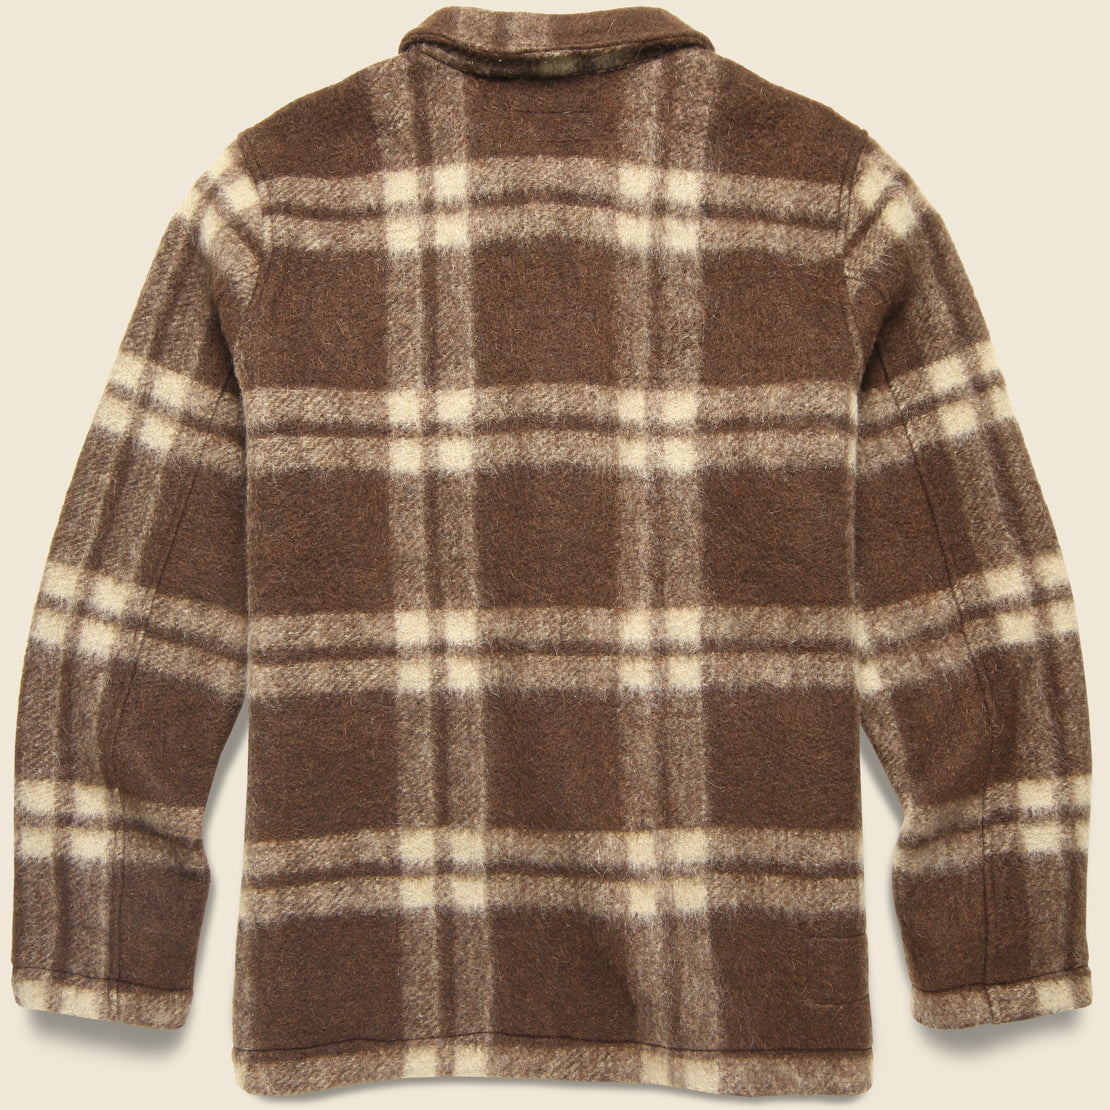 Soft Wool Field Jacket - Brown Plaid - Universal Works - STAG Provisions - Outerwear - Coat / Jacket